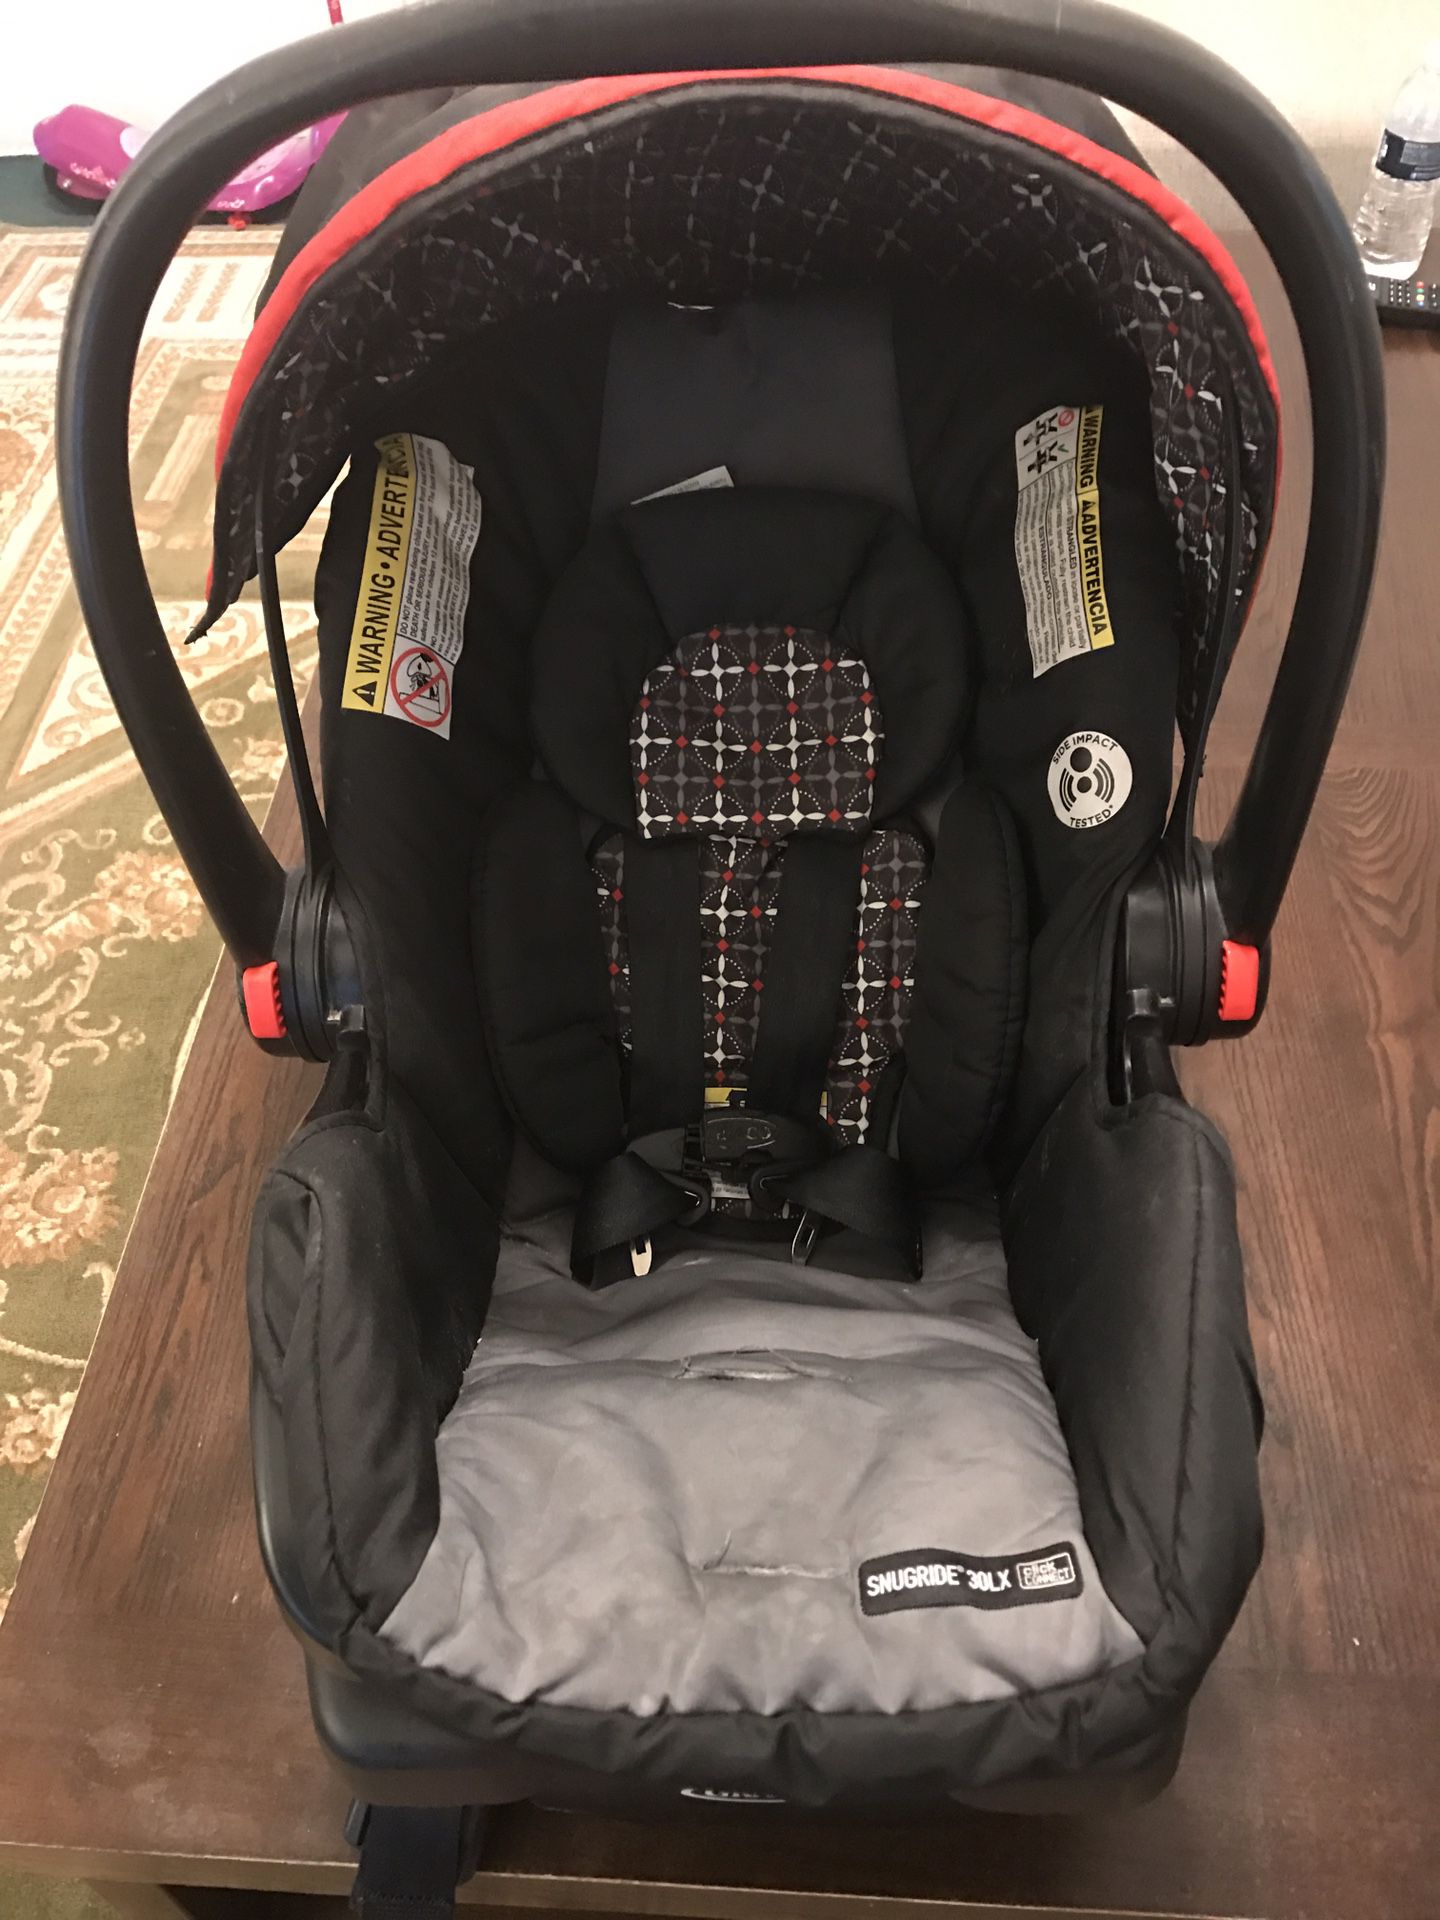 Graco Infant car seat and a double stroller